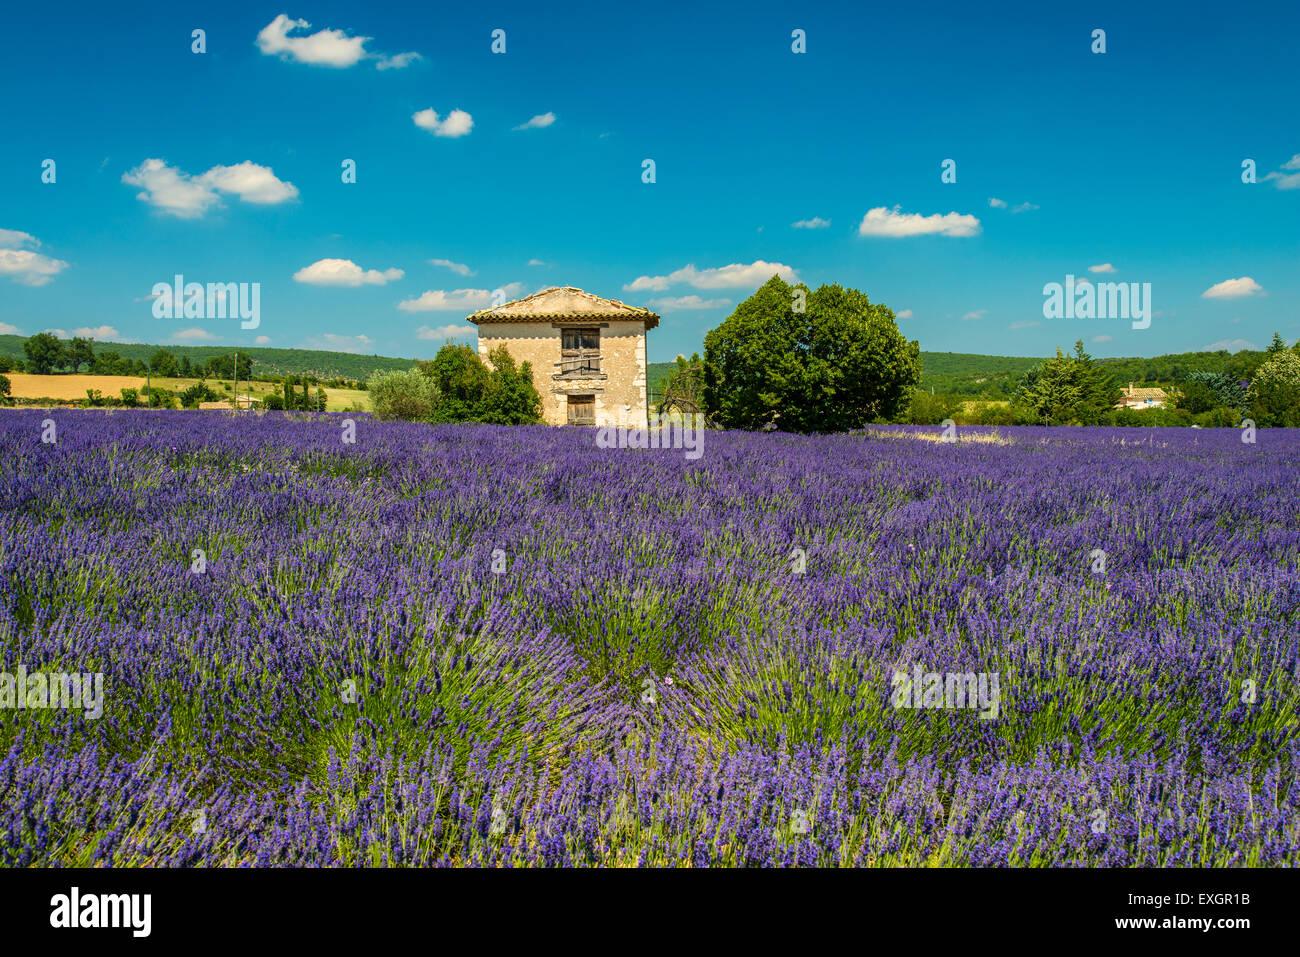 Stone cottage in the middle of a lavender field in bloom, Provence, France Stock Photo